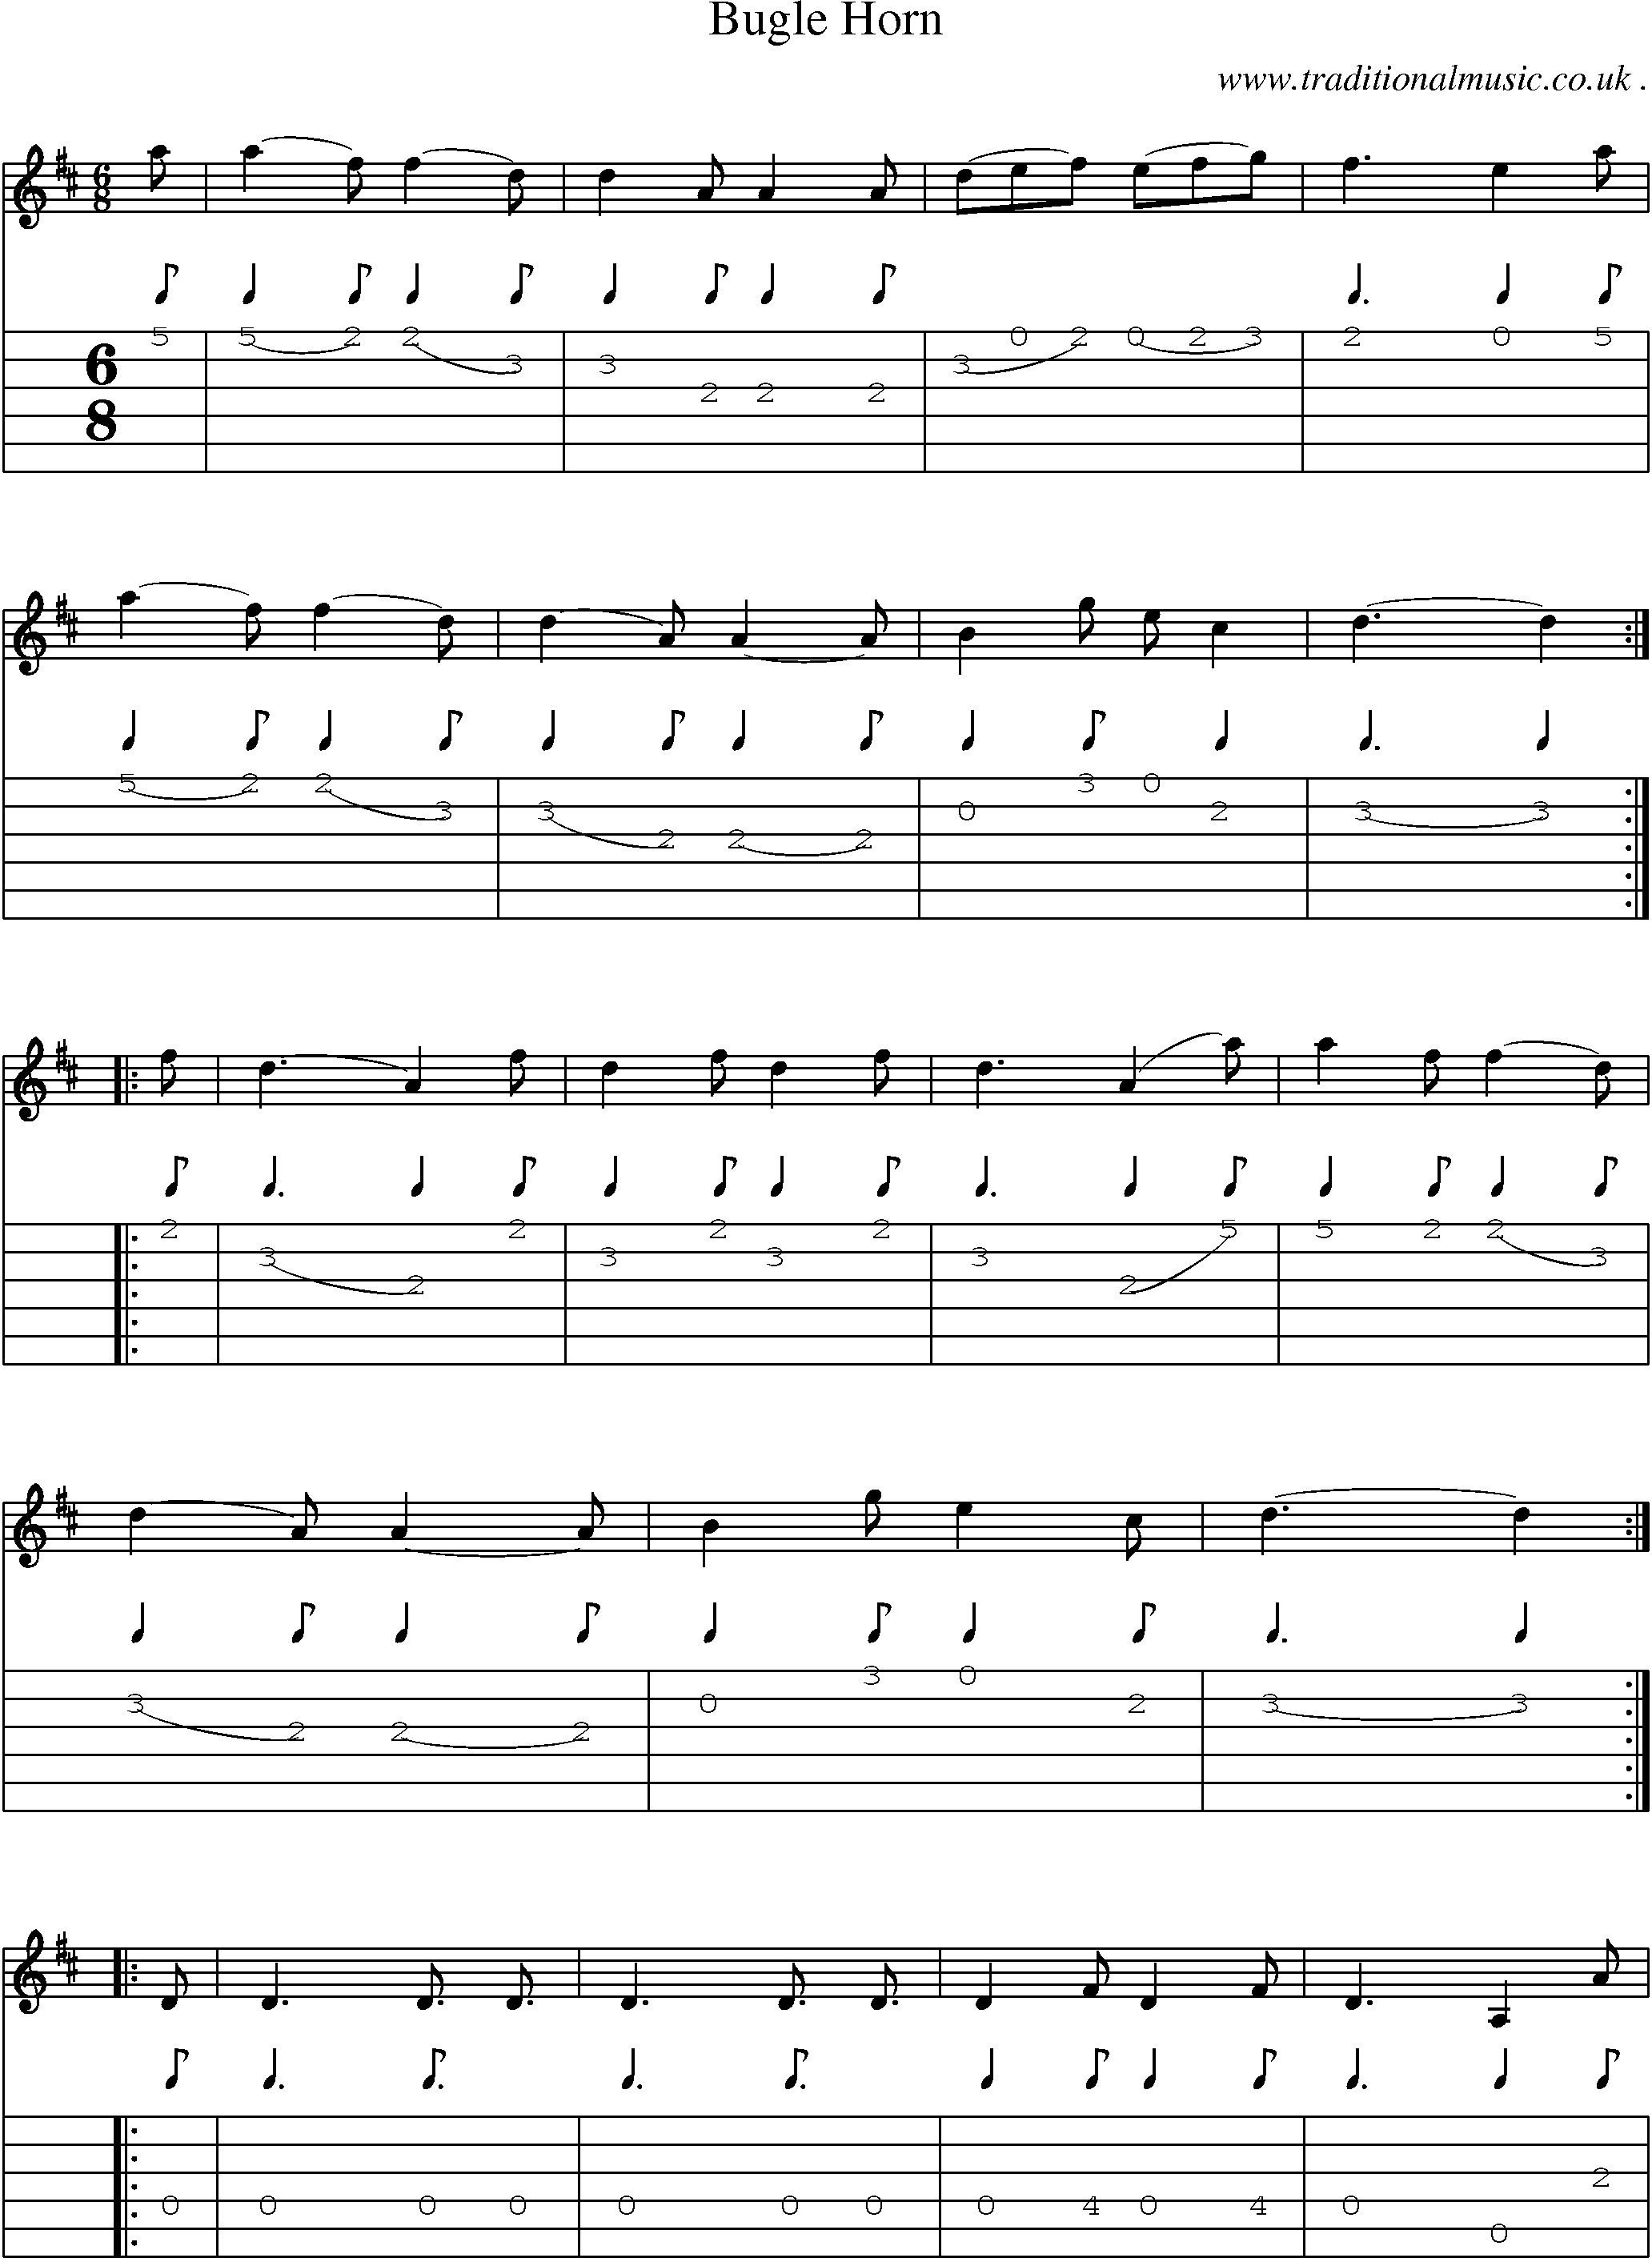 Sheet-Music and Guitar Tabs for Bugle Horn